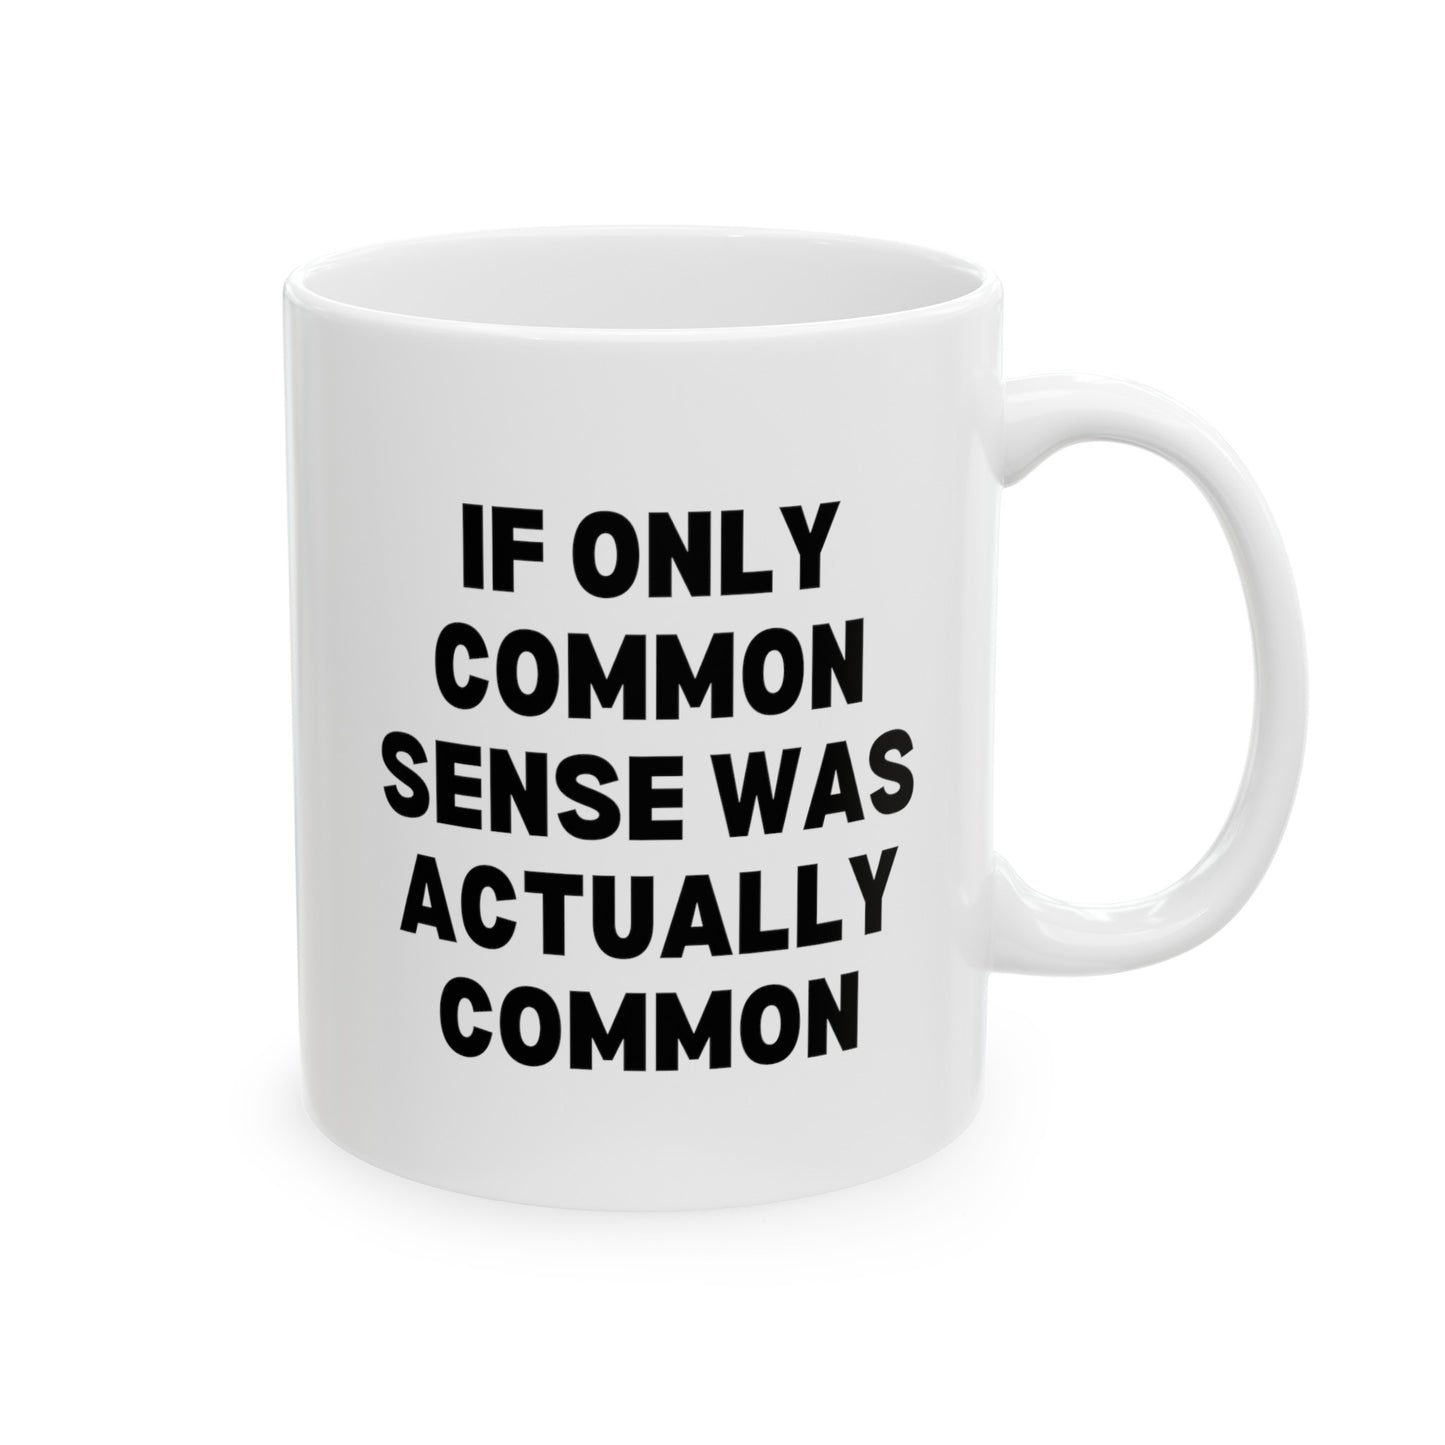 If Only Common Sense Was Actually Common 11oz white funny large coffee mug gift for morning person coworker secret santa sarcasm sarcastic waveywares wavey wares wavywares wavy wares